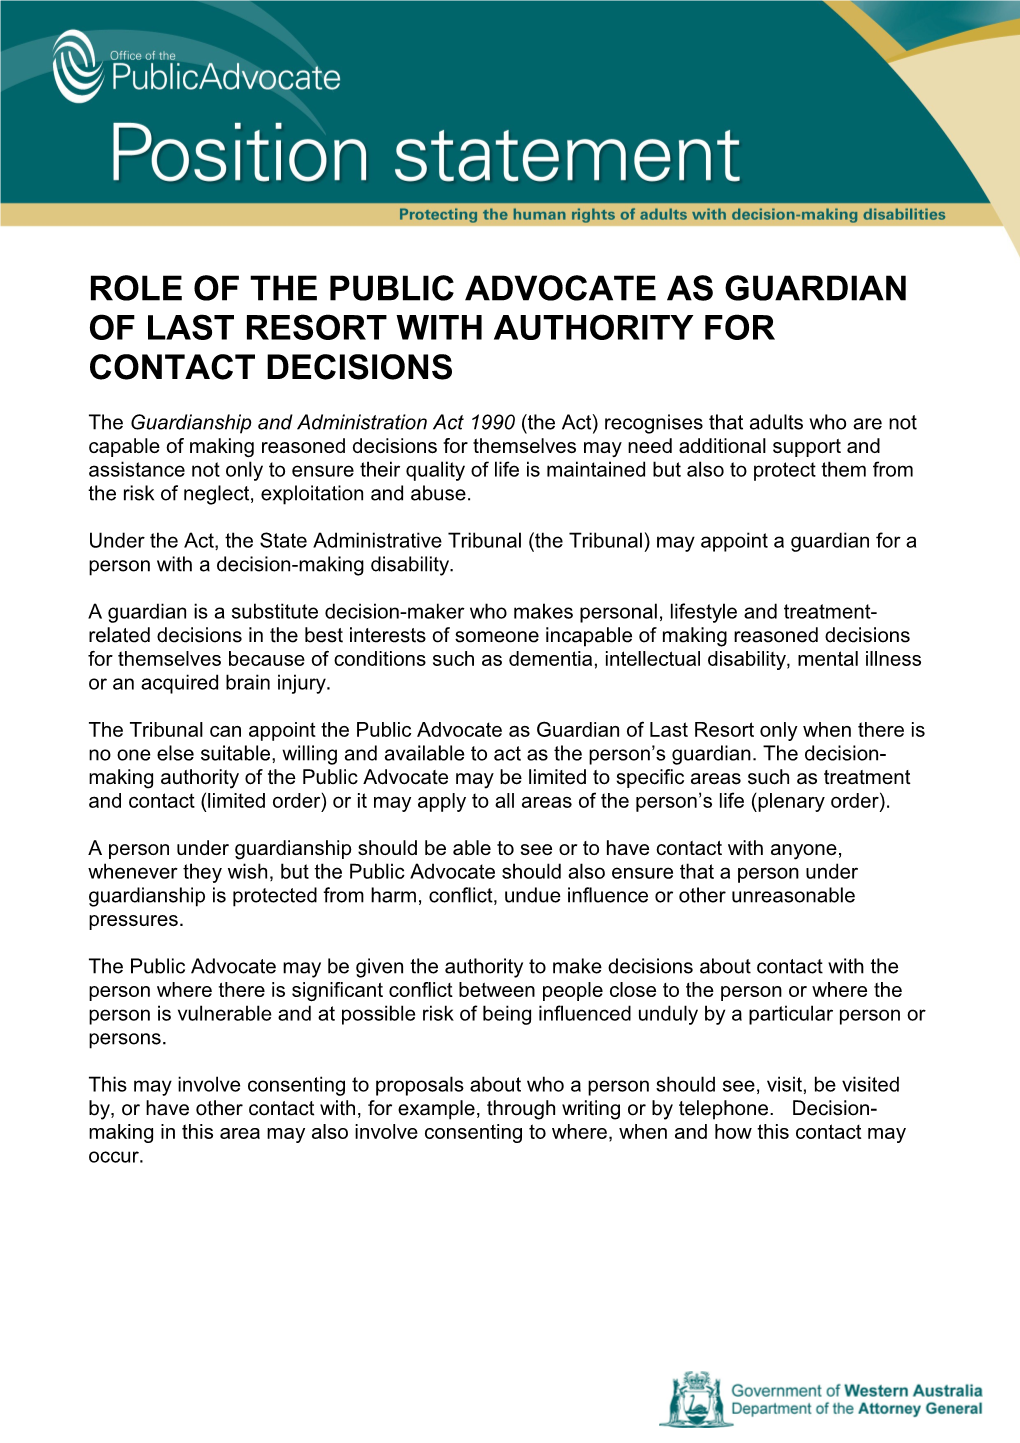 Role of the Public Advocate As Guardian of Last Resort with Authority for Contact Decisions